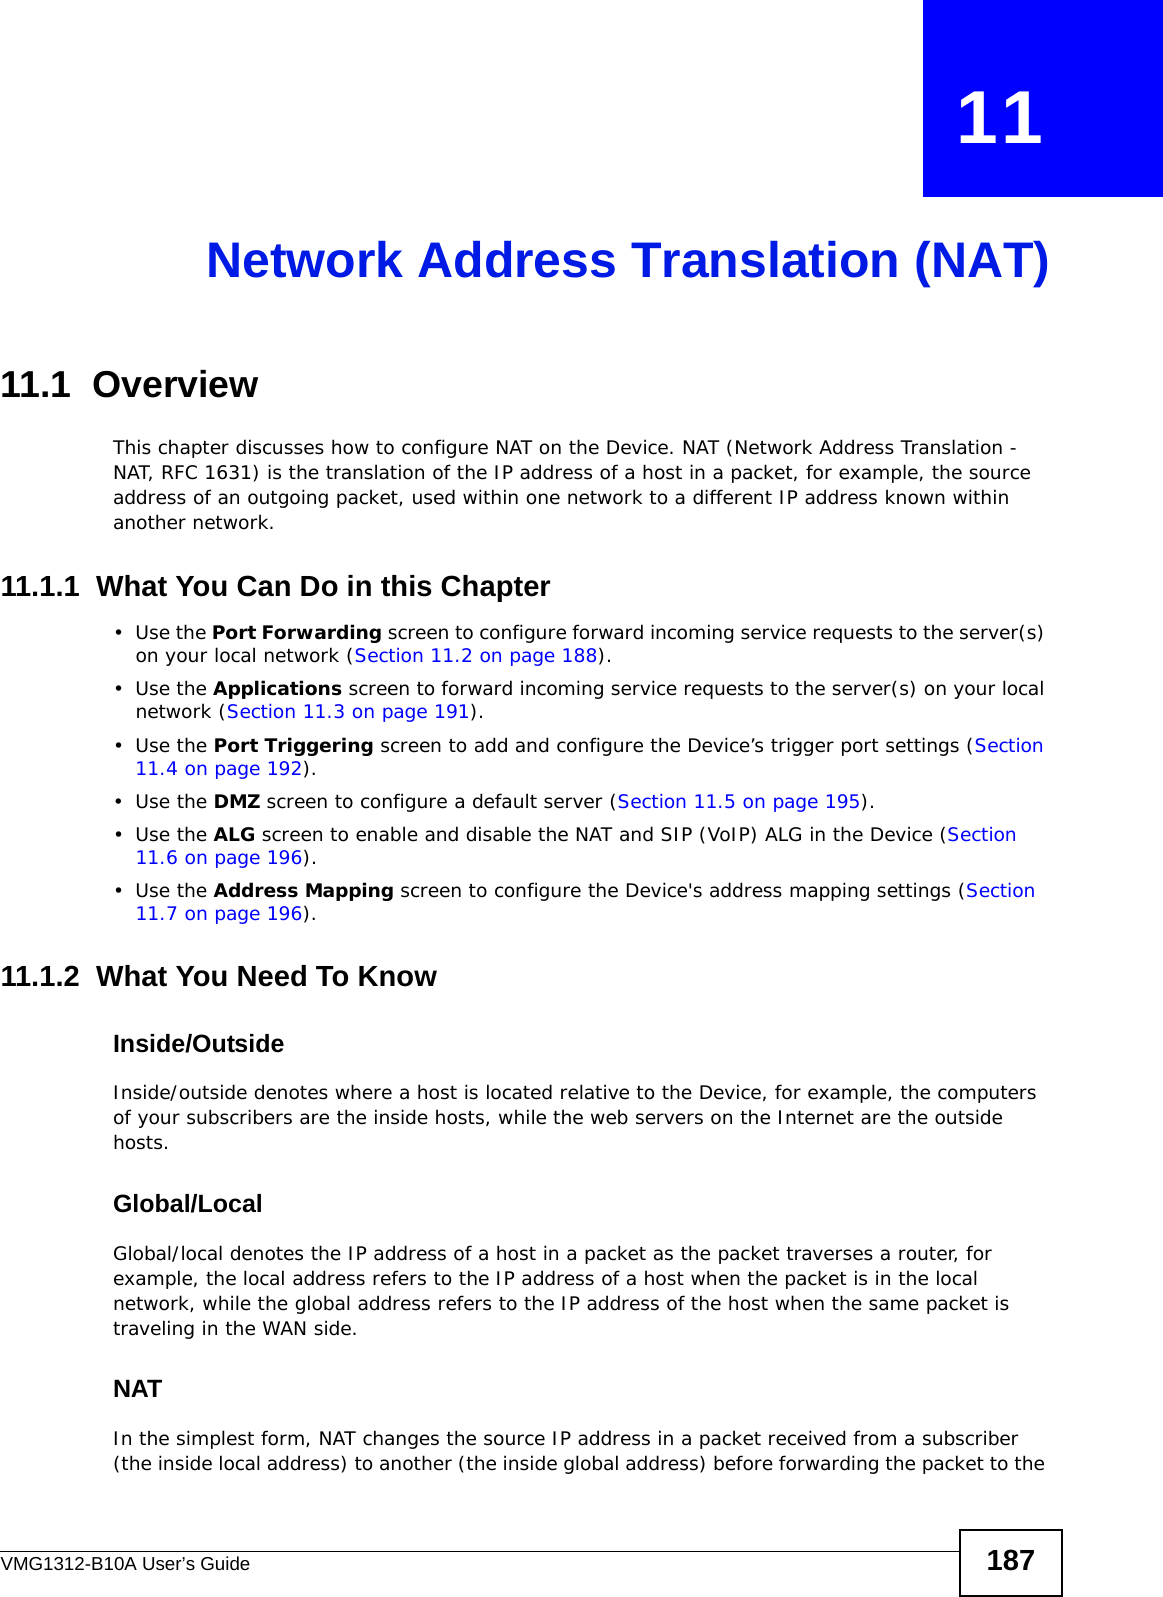 VMG1312-B10A User’s Guide 187CHAPTER   11Network Address Translation (NAT)11.1  OverviewThis chapter discusses how to configure NAT on the Device. NAT (Network Address Translation - NAT, RFC 1631) is the translation of the IP address of a host in a packet, for example, the source address of an outgoing packet, used within one network to a different IP address known within another network.11.1.1  What You Can Do in this Chapter•Use the Port Forwarding screen to configure forward incoming service requests to the server(s) on your local network (Section 11.2 on page 188). •Use the Applications screen to forward incoming service requests to the server(s) on your local network (Section 11.3 on page 191).•Use the Port Triggering screen to add and configure the Device’s trigger port settings (Section 11.4 on page 192).•Use the DMZ screen to configure a default server (Section 11.5 on page 195).•Use the ALG screen to enable and disable the NAT and SIP (VoIP) ALG in the Device (Section 11.6 on page 196).•Use the Address Mapping screen to configure the Device&apos;s address mapping settings (Section 11.7 on page 196). 11.1.2  What You Need To KnowInside/OutsideInside/outside denotes where a host is located relative to the Device, for example, the computers of your subscribers are the inside hosts, while the web servers on the Internet are the outside hosts. Global/LocalGlobal/local denotes the IP address of a host in a packet as the packet traverses a router, for example, the local address refers to the IP address of a host when the packet is in the local network, while the global address refers to the IP address of the host when the same packet is traveling in the WAN side. NATIn the simplest form, NAT changes the source IP address in a packet received from a subscriber (the inside local address) to another (the inside global address) before forwarding the packet to the 